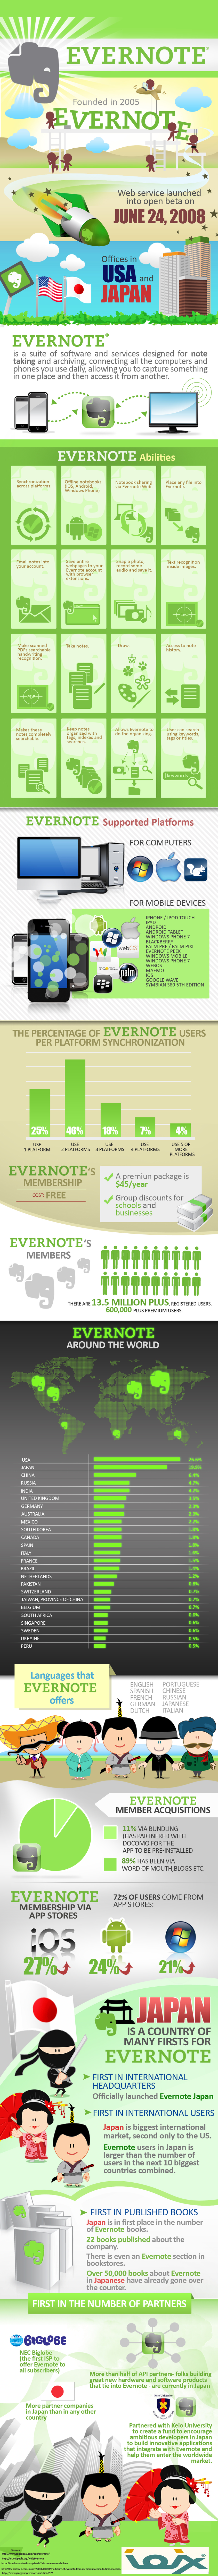 Evernote Facts